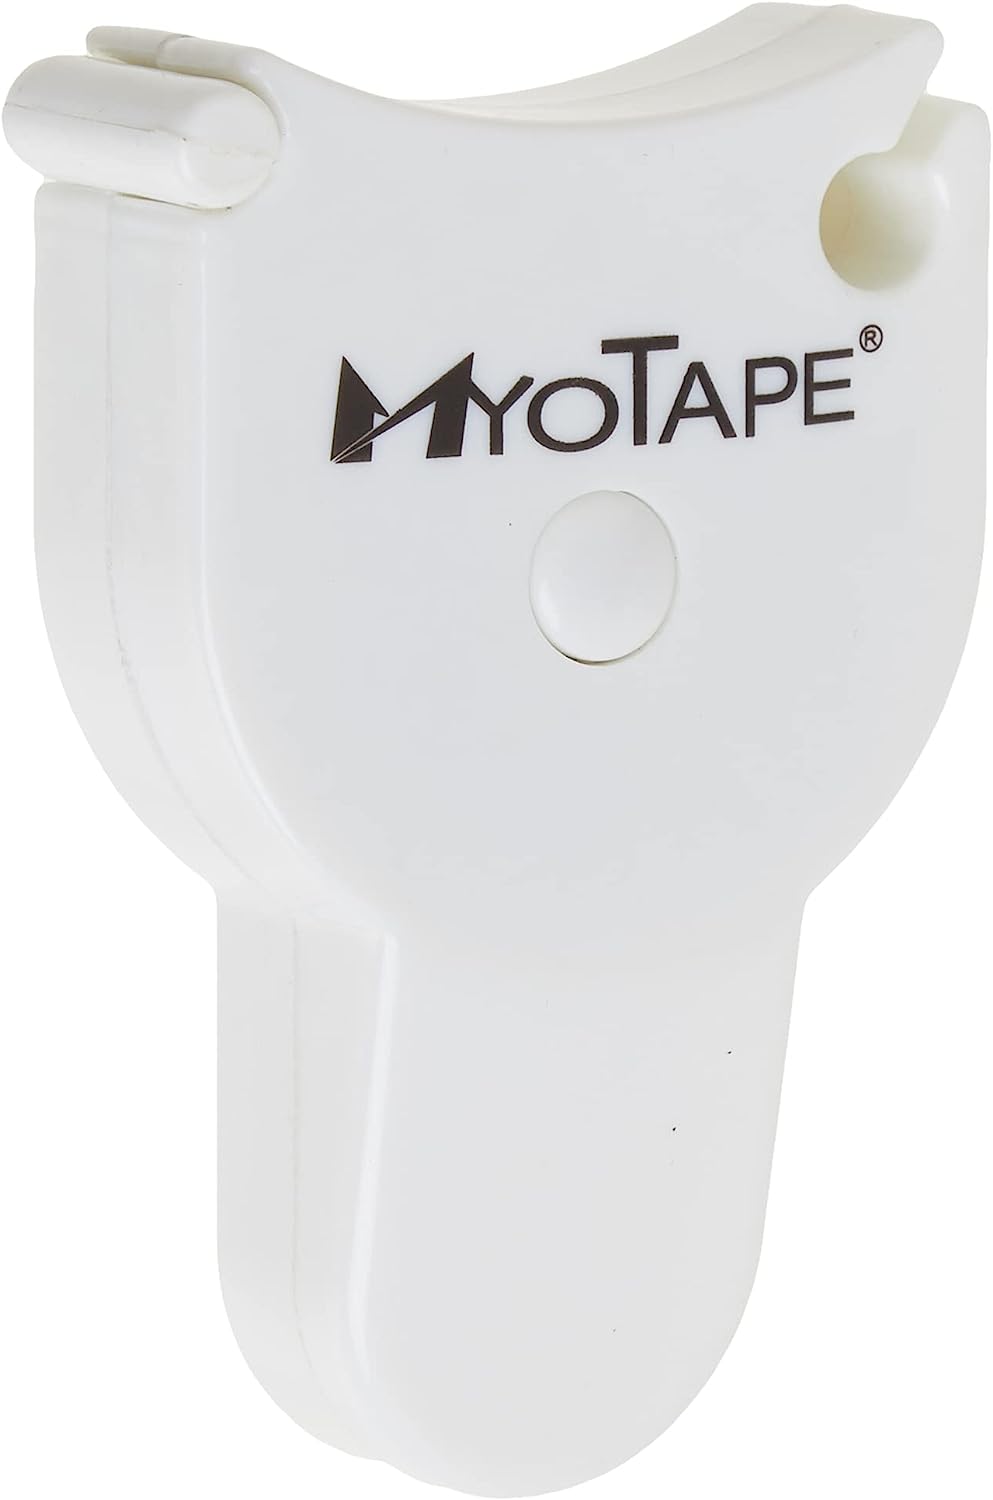 MyoTape Body Measure Tape - Arms Chest Thigh or Waist [...]